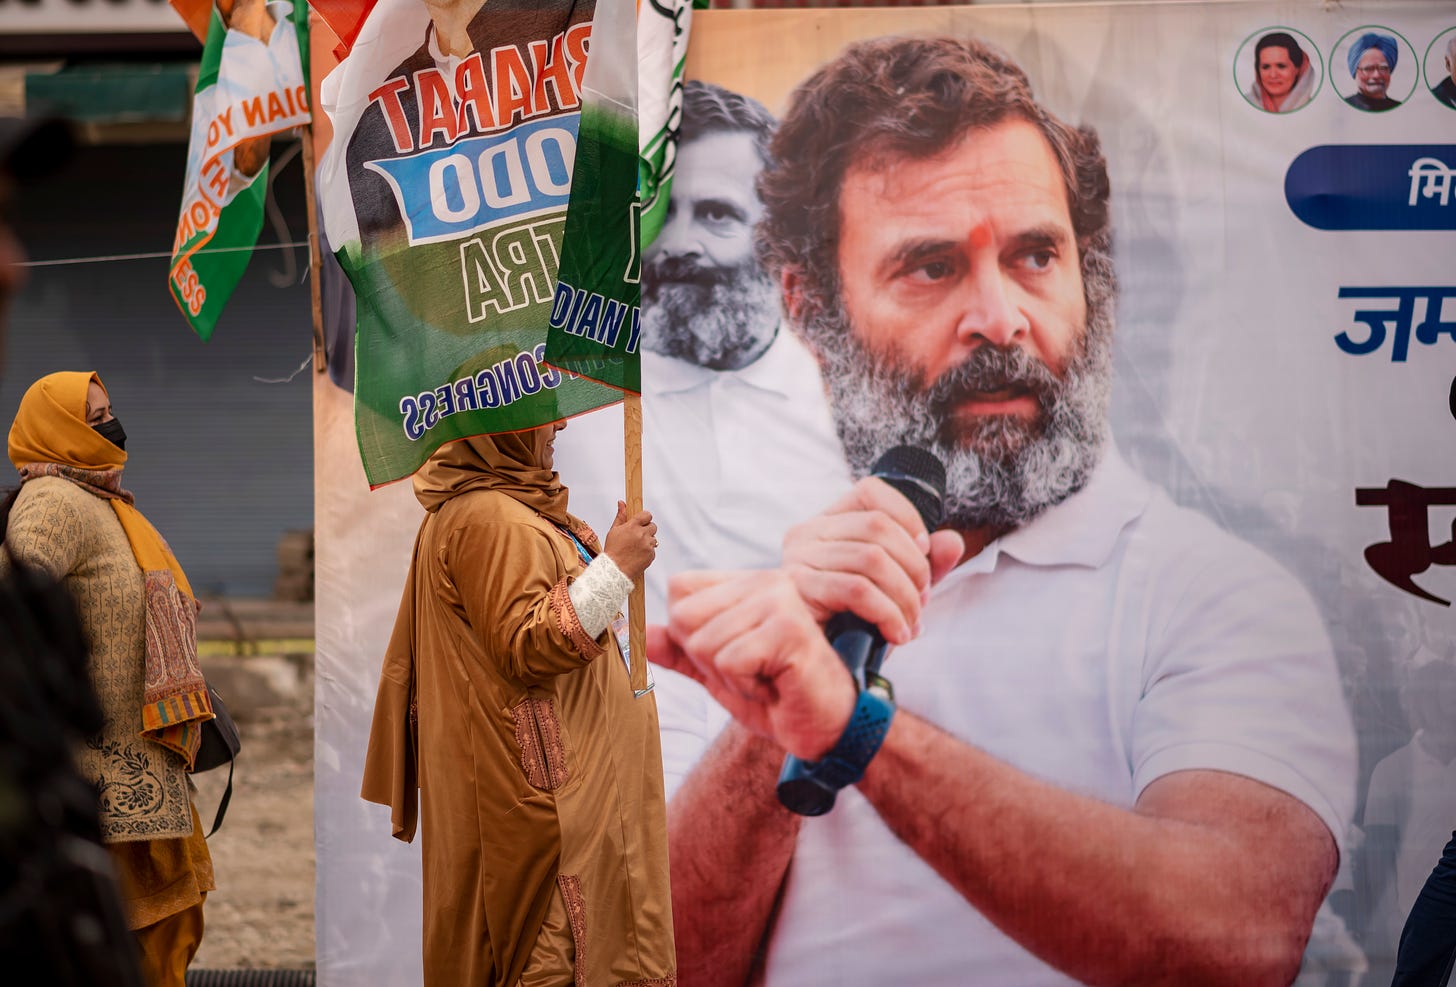 Srinagar, Jammu and Kashmir: A supporter of India’s Congress party holds a flag while walking past a billboard depicting Congress leader Rahul Gandhi during his 4,000 km march across the country. (Photo by Idrees Abbas/SOPA Images/LightRocket via Getty Images)